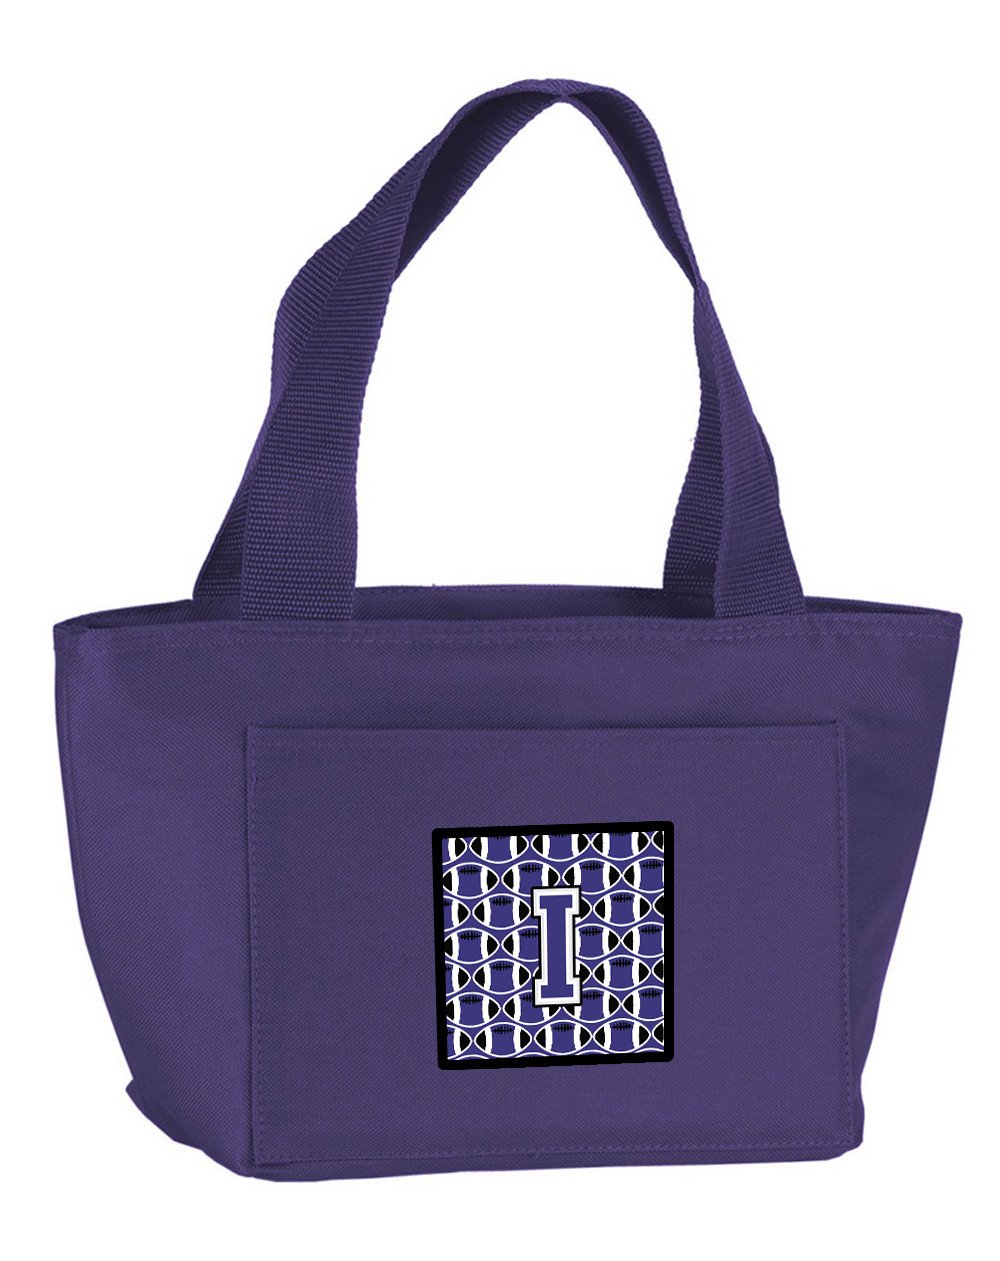 Letter I Football Purple and White Lunch Bag CJ1068-IPR-8808 by Caroline's Treasures